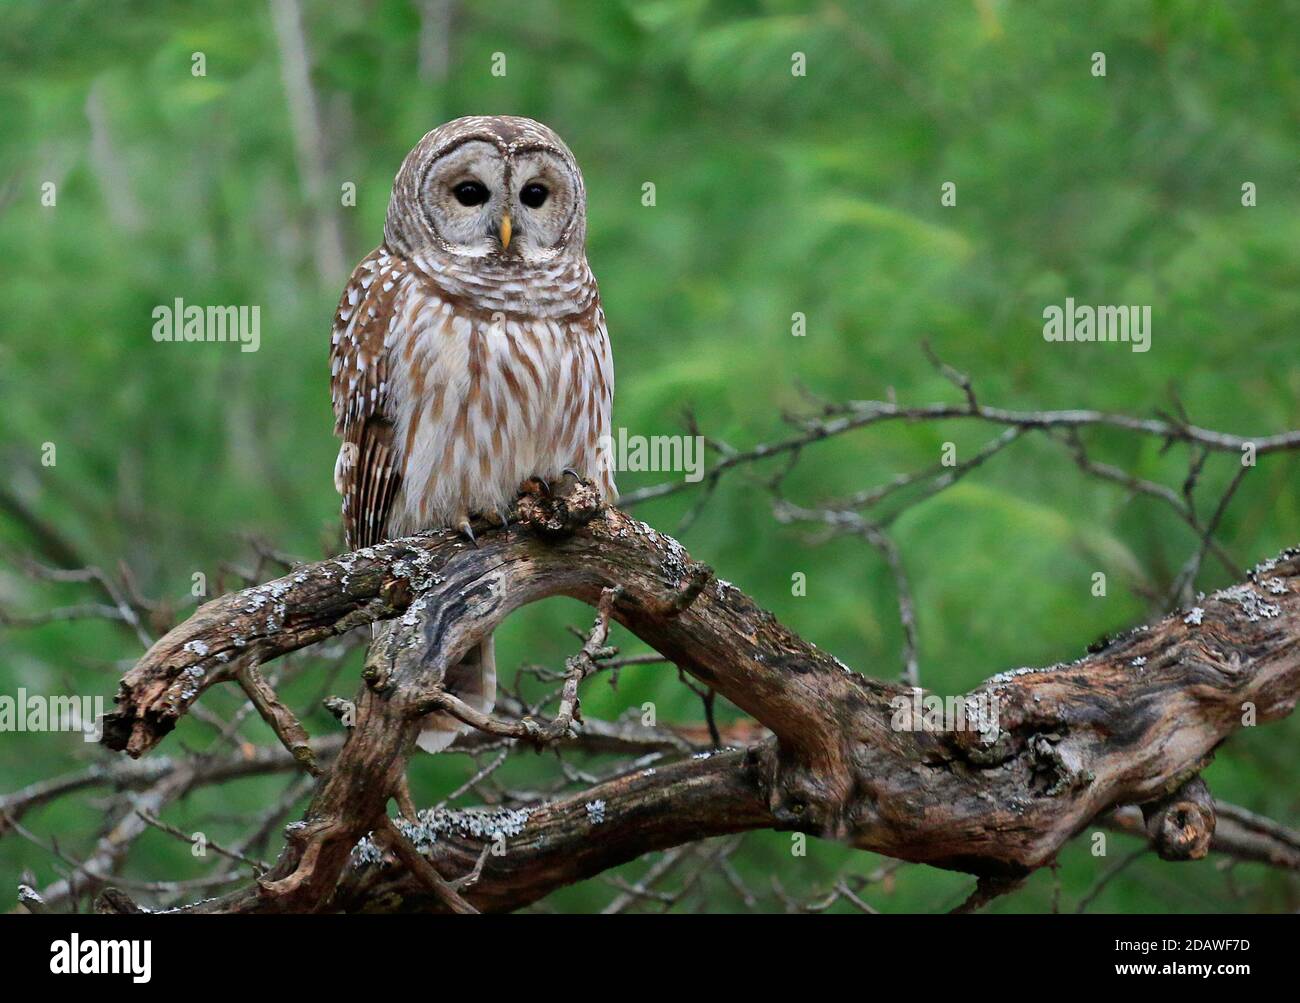 Barred Owl standing on a tree branch with green background Stock Photo